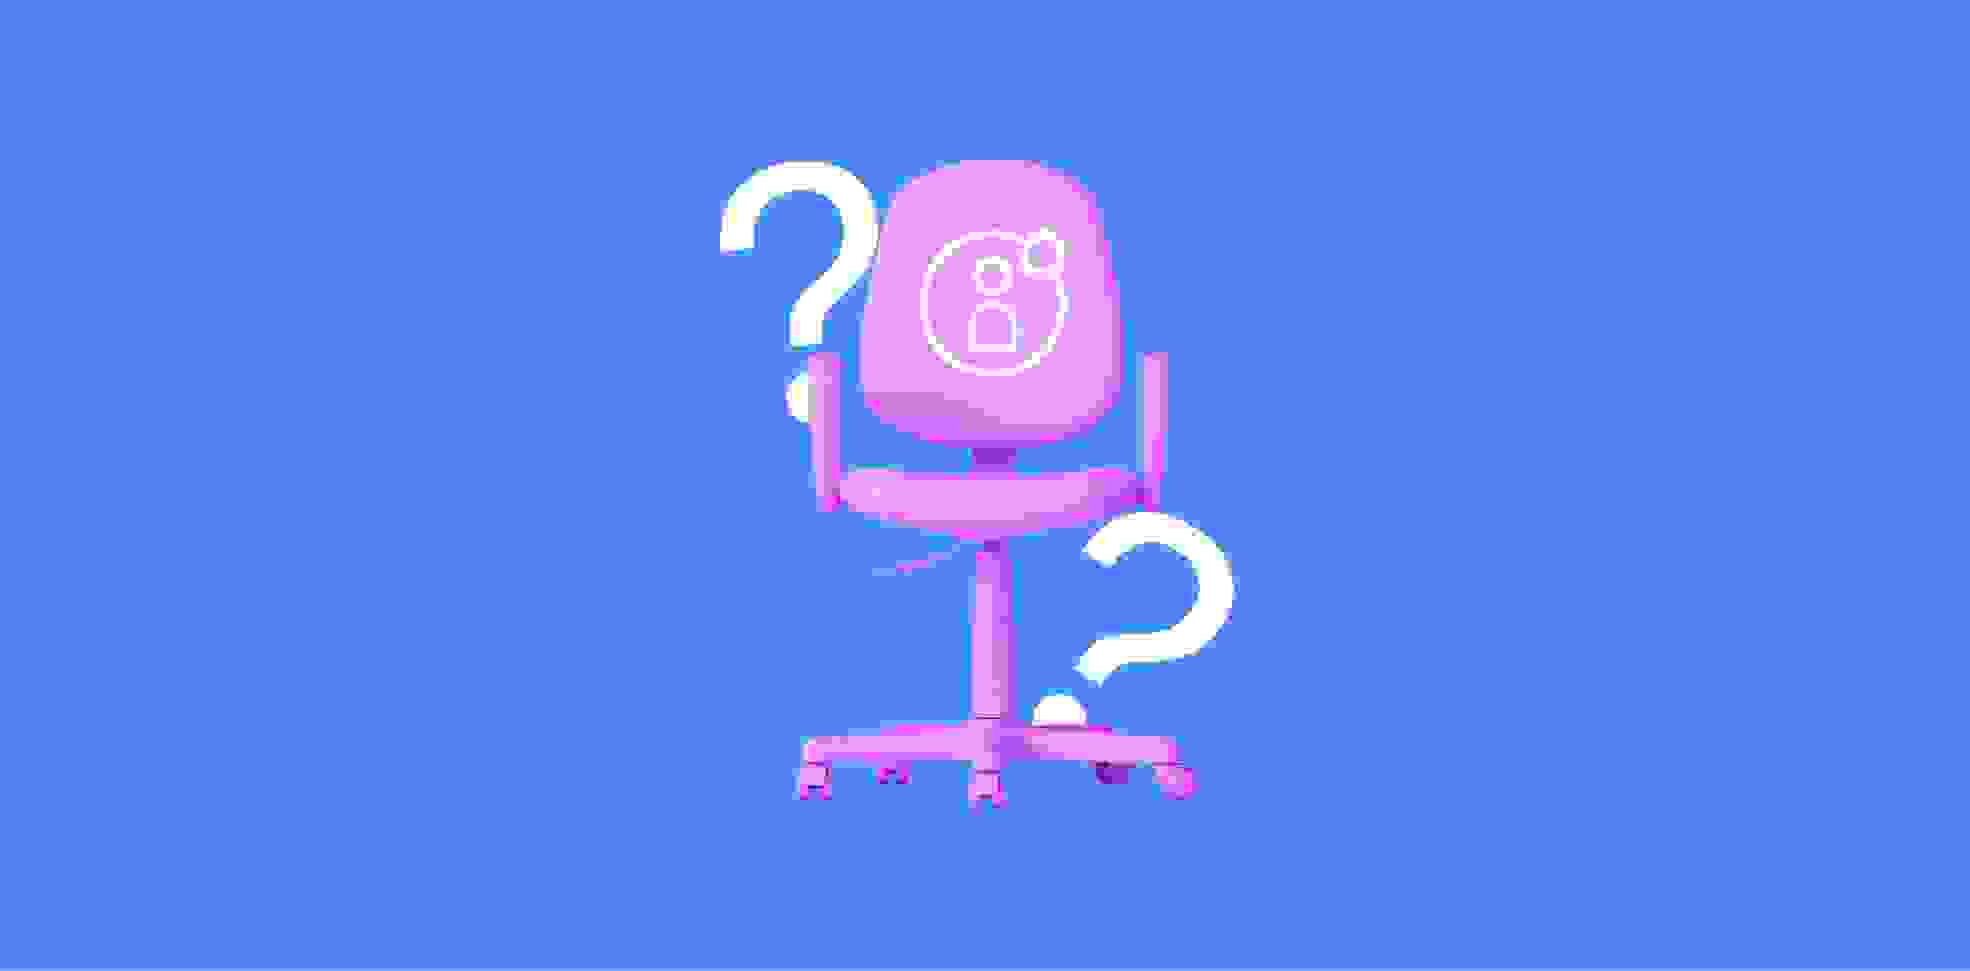 question marks on a chair on a blue background